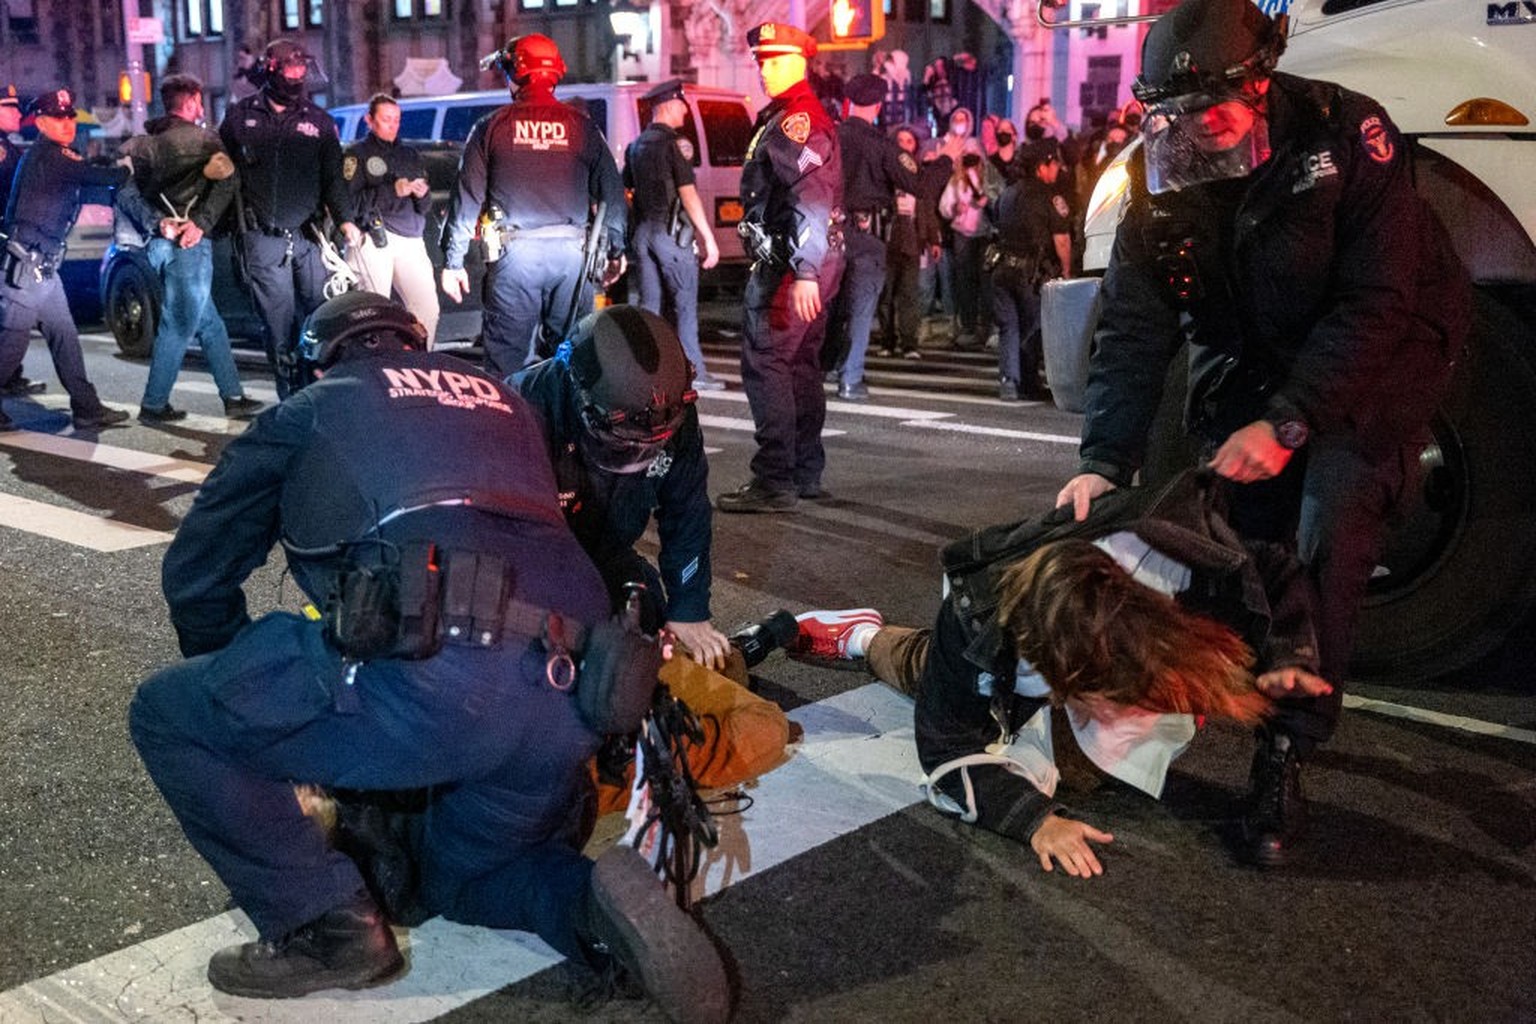 NEW YORK, NEW YORK - APRIL 30: Police arrest protesters during pro-Palestinian demonstrations at The City College Of New York (CUNY) as the NYPD cracks down on protest camps at both Columbia Universit ...